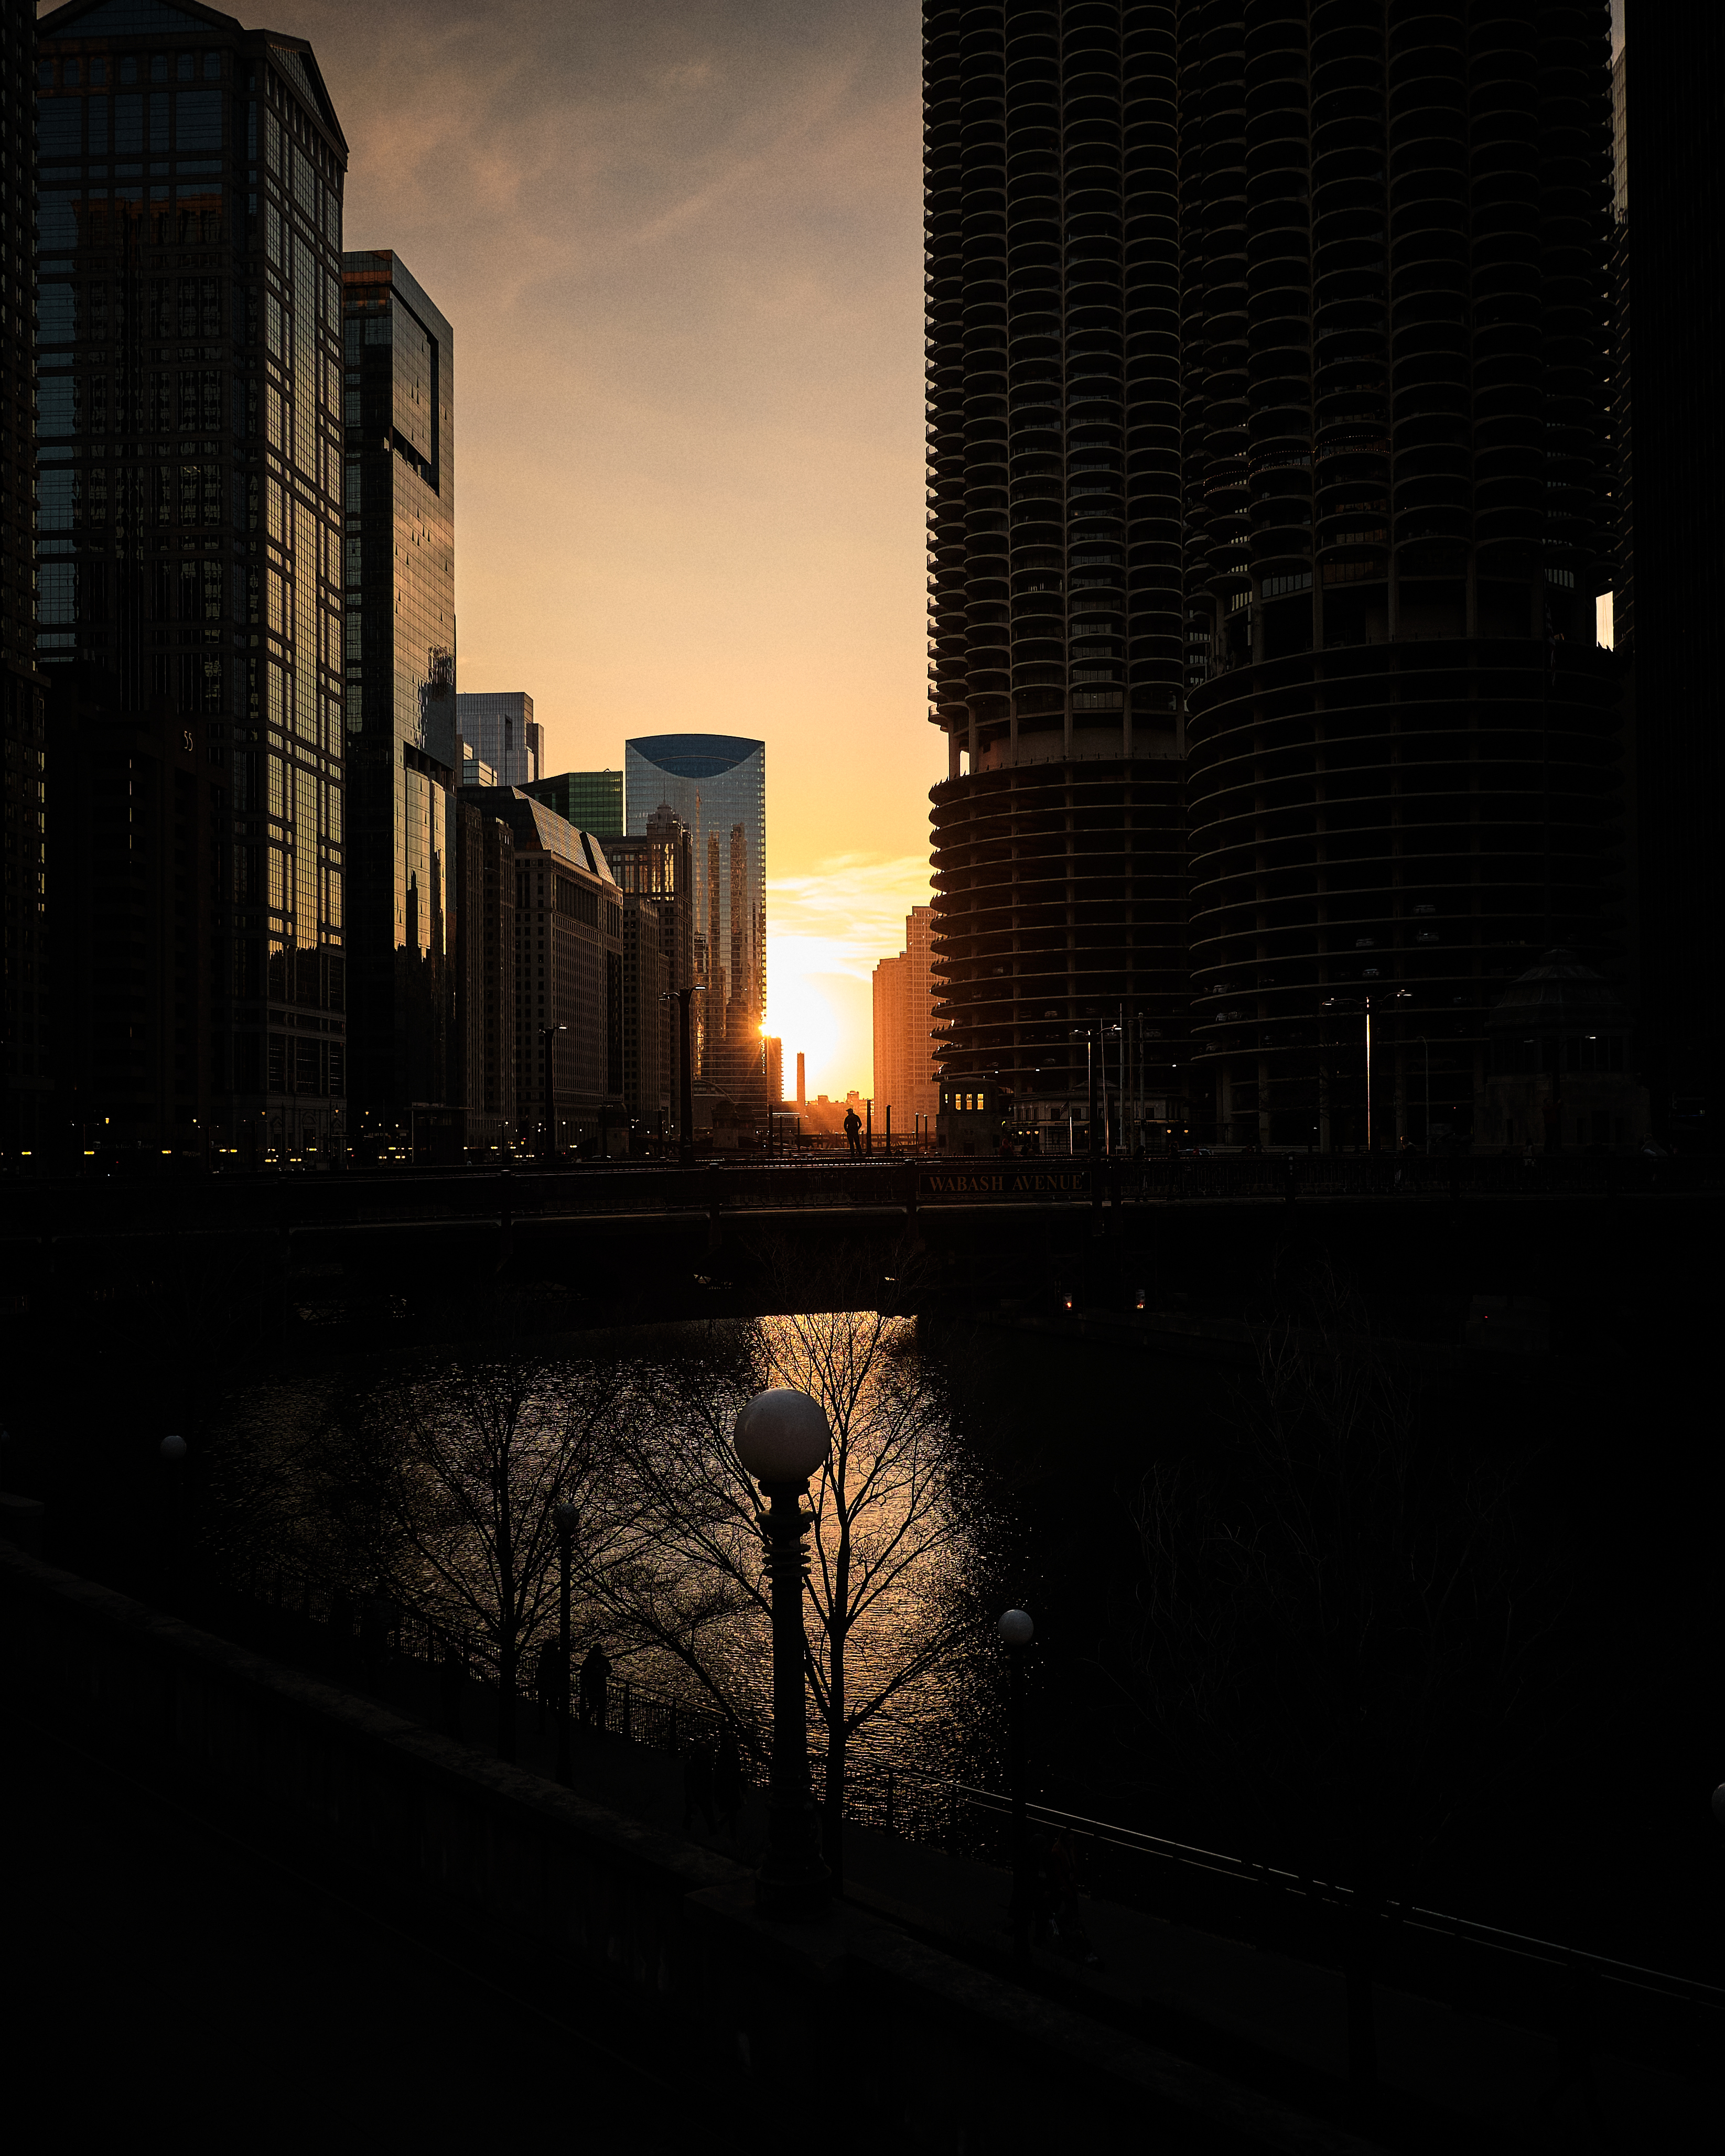 A man stands on the Wabash bridge over the Chicago River, silhouetted by the setting sun.